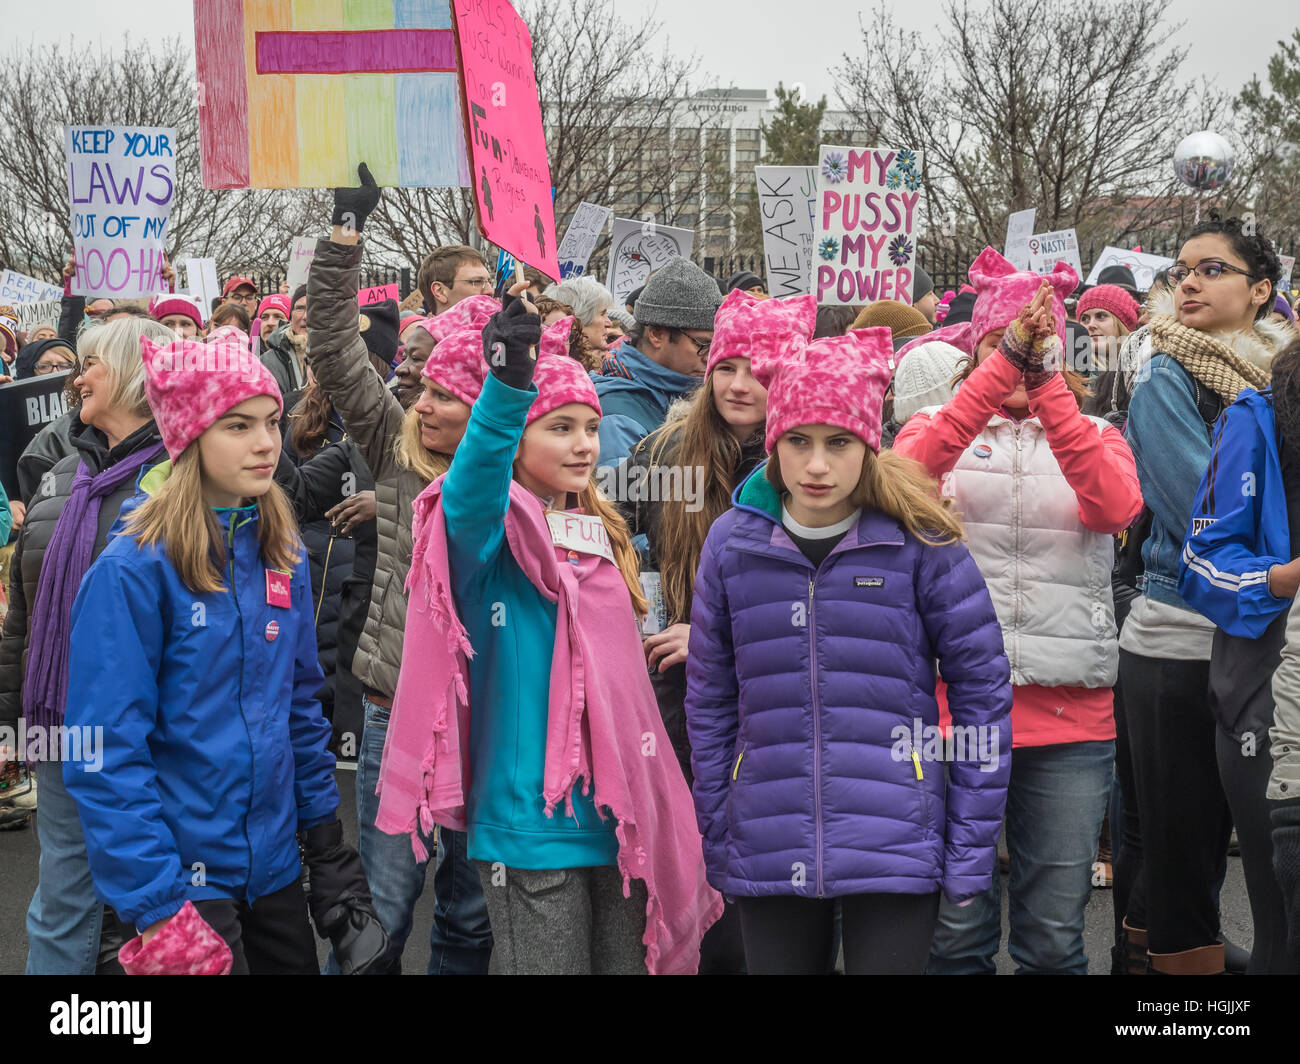 Saint Paul, Minnesota, USA. 21st January, 2017.  Young women in pink pussycat hats walk in the Women's March  in St Paul, Minnesota. Cindy Carlsson/Alamy Live News Stock Photo